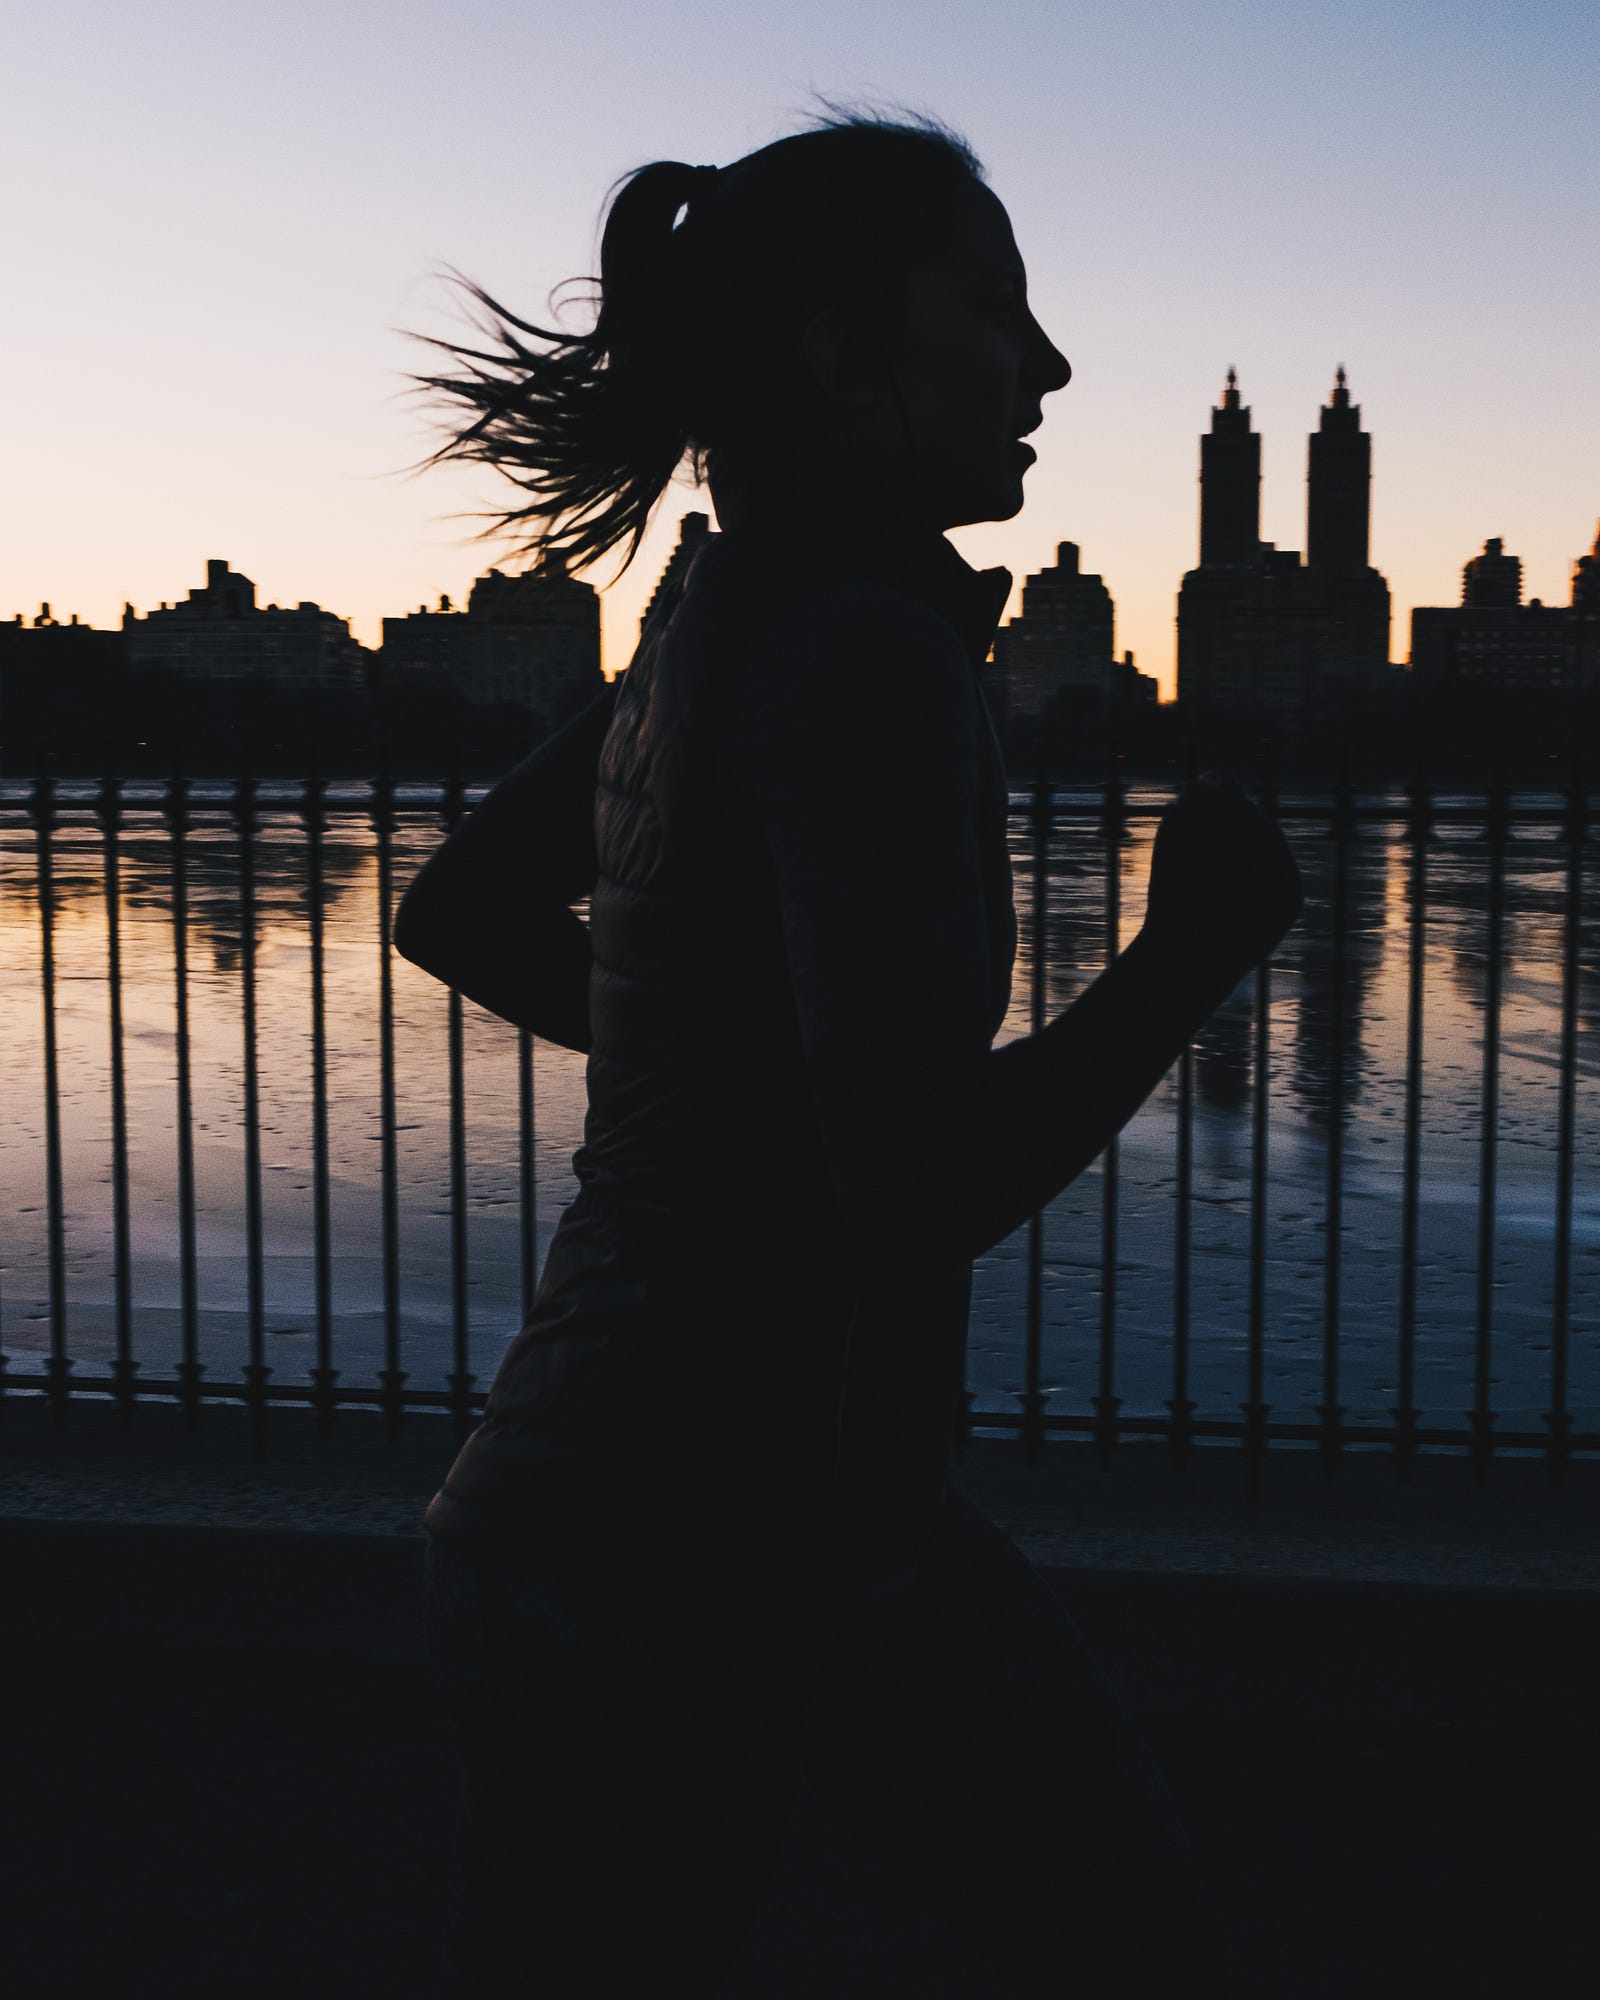 A women runs from left to right, seen in silhouette. There is a lake behind here, with a couple of building spires in the distance. Lifelong endurance exercise is not associated with a better coronary artery calcification profile.